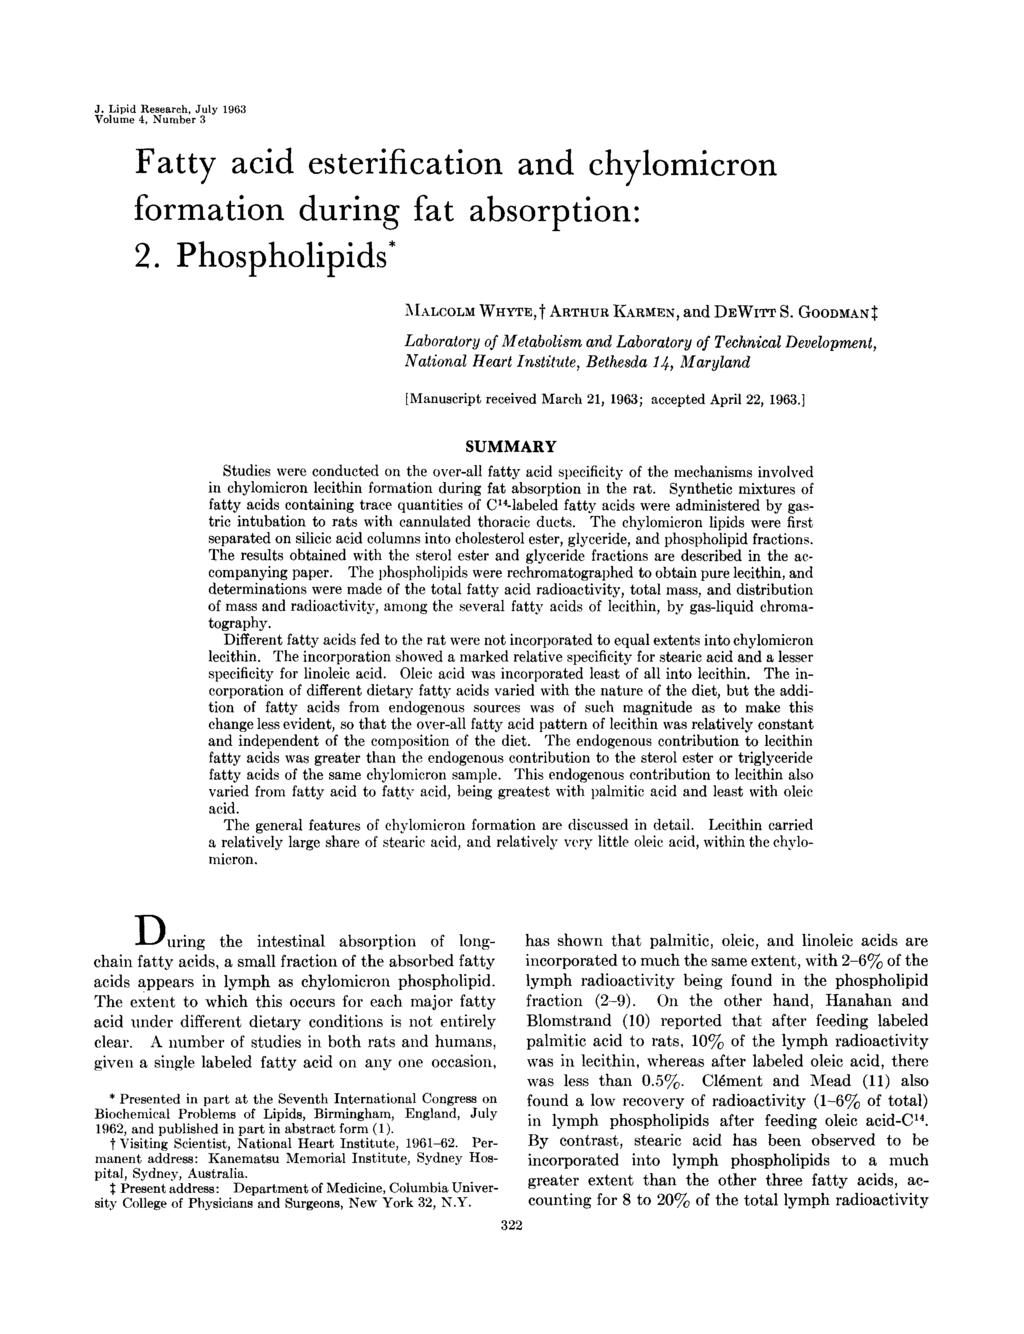 J. Lipid Research, July 19G3 Volume 4, Number 3 Fatty acid esterification and chylomicron formation during fat absorption: 2. Phospholipids* nialc0lm WHYTE,t ARTHUR KARMEN, and DEWITT 8.